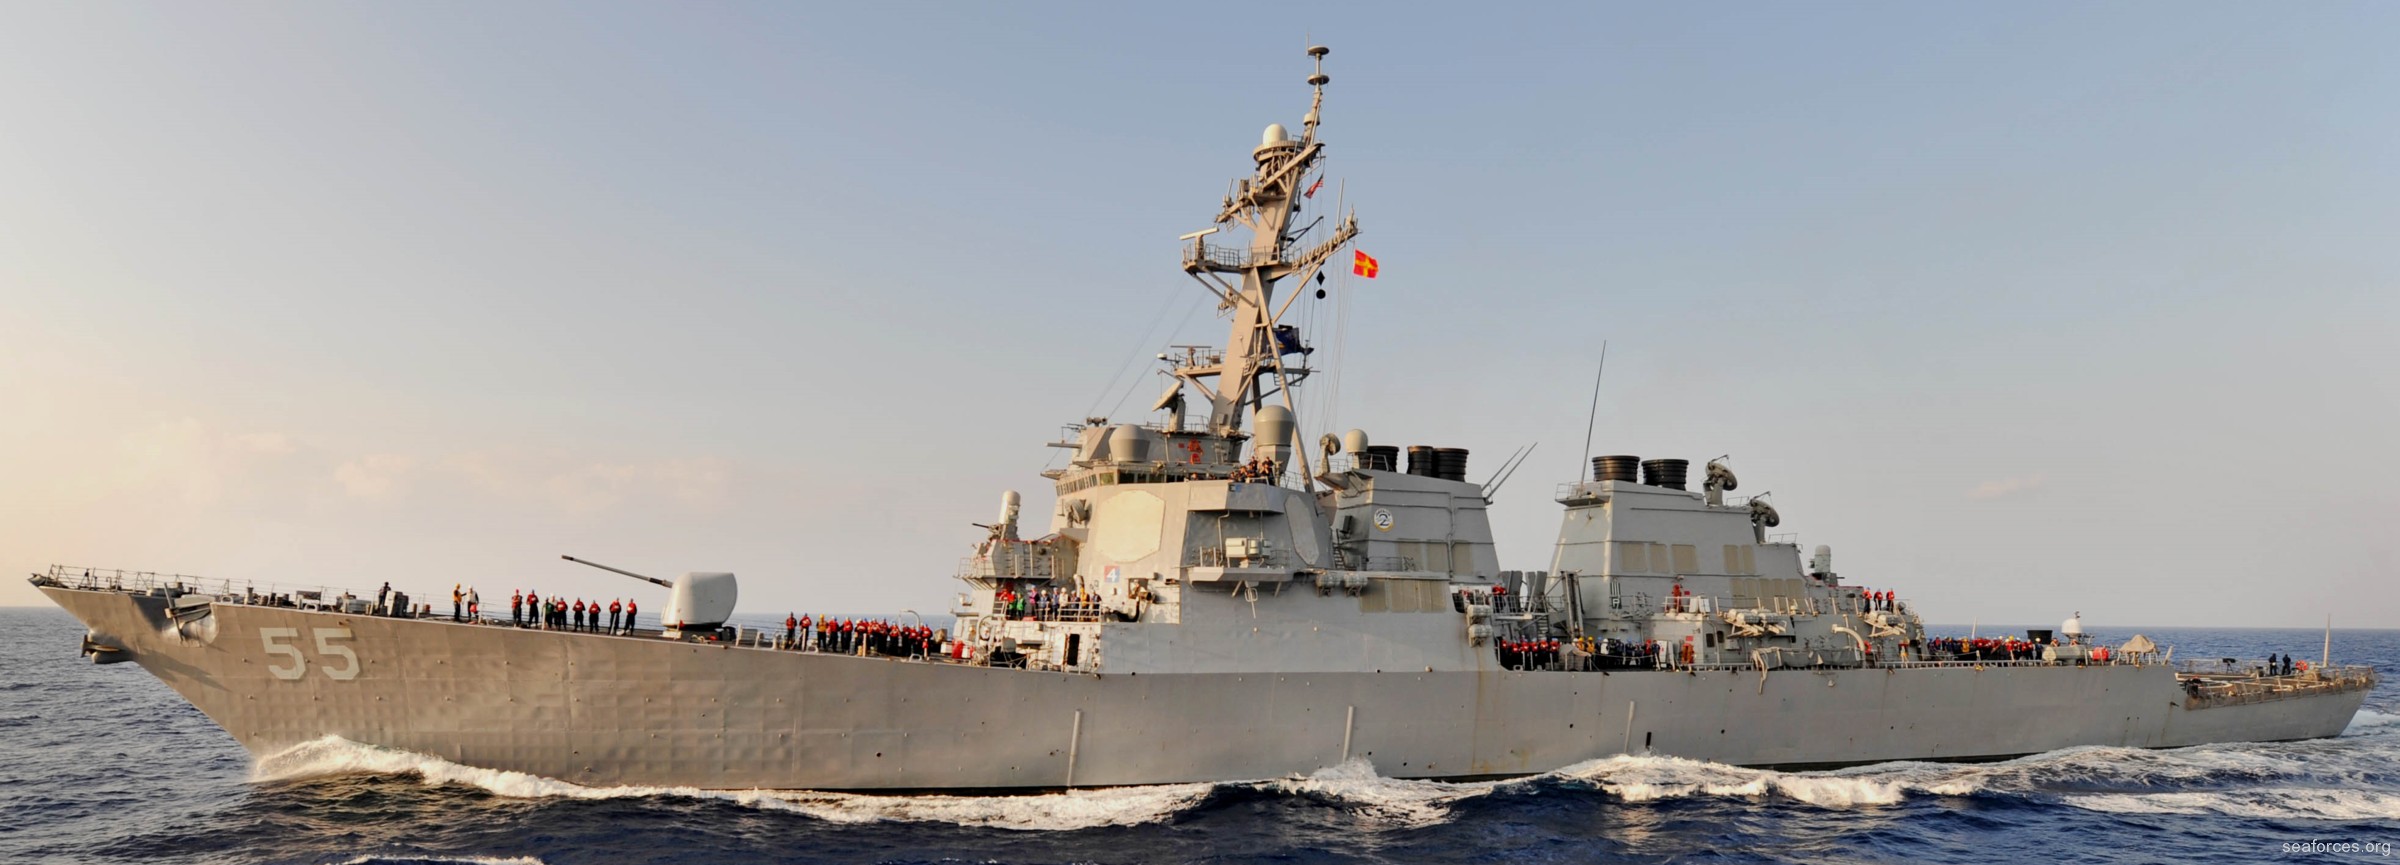 ddg-55 uss stout guided missile destroyer us navy 73